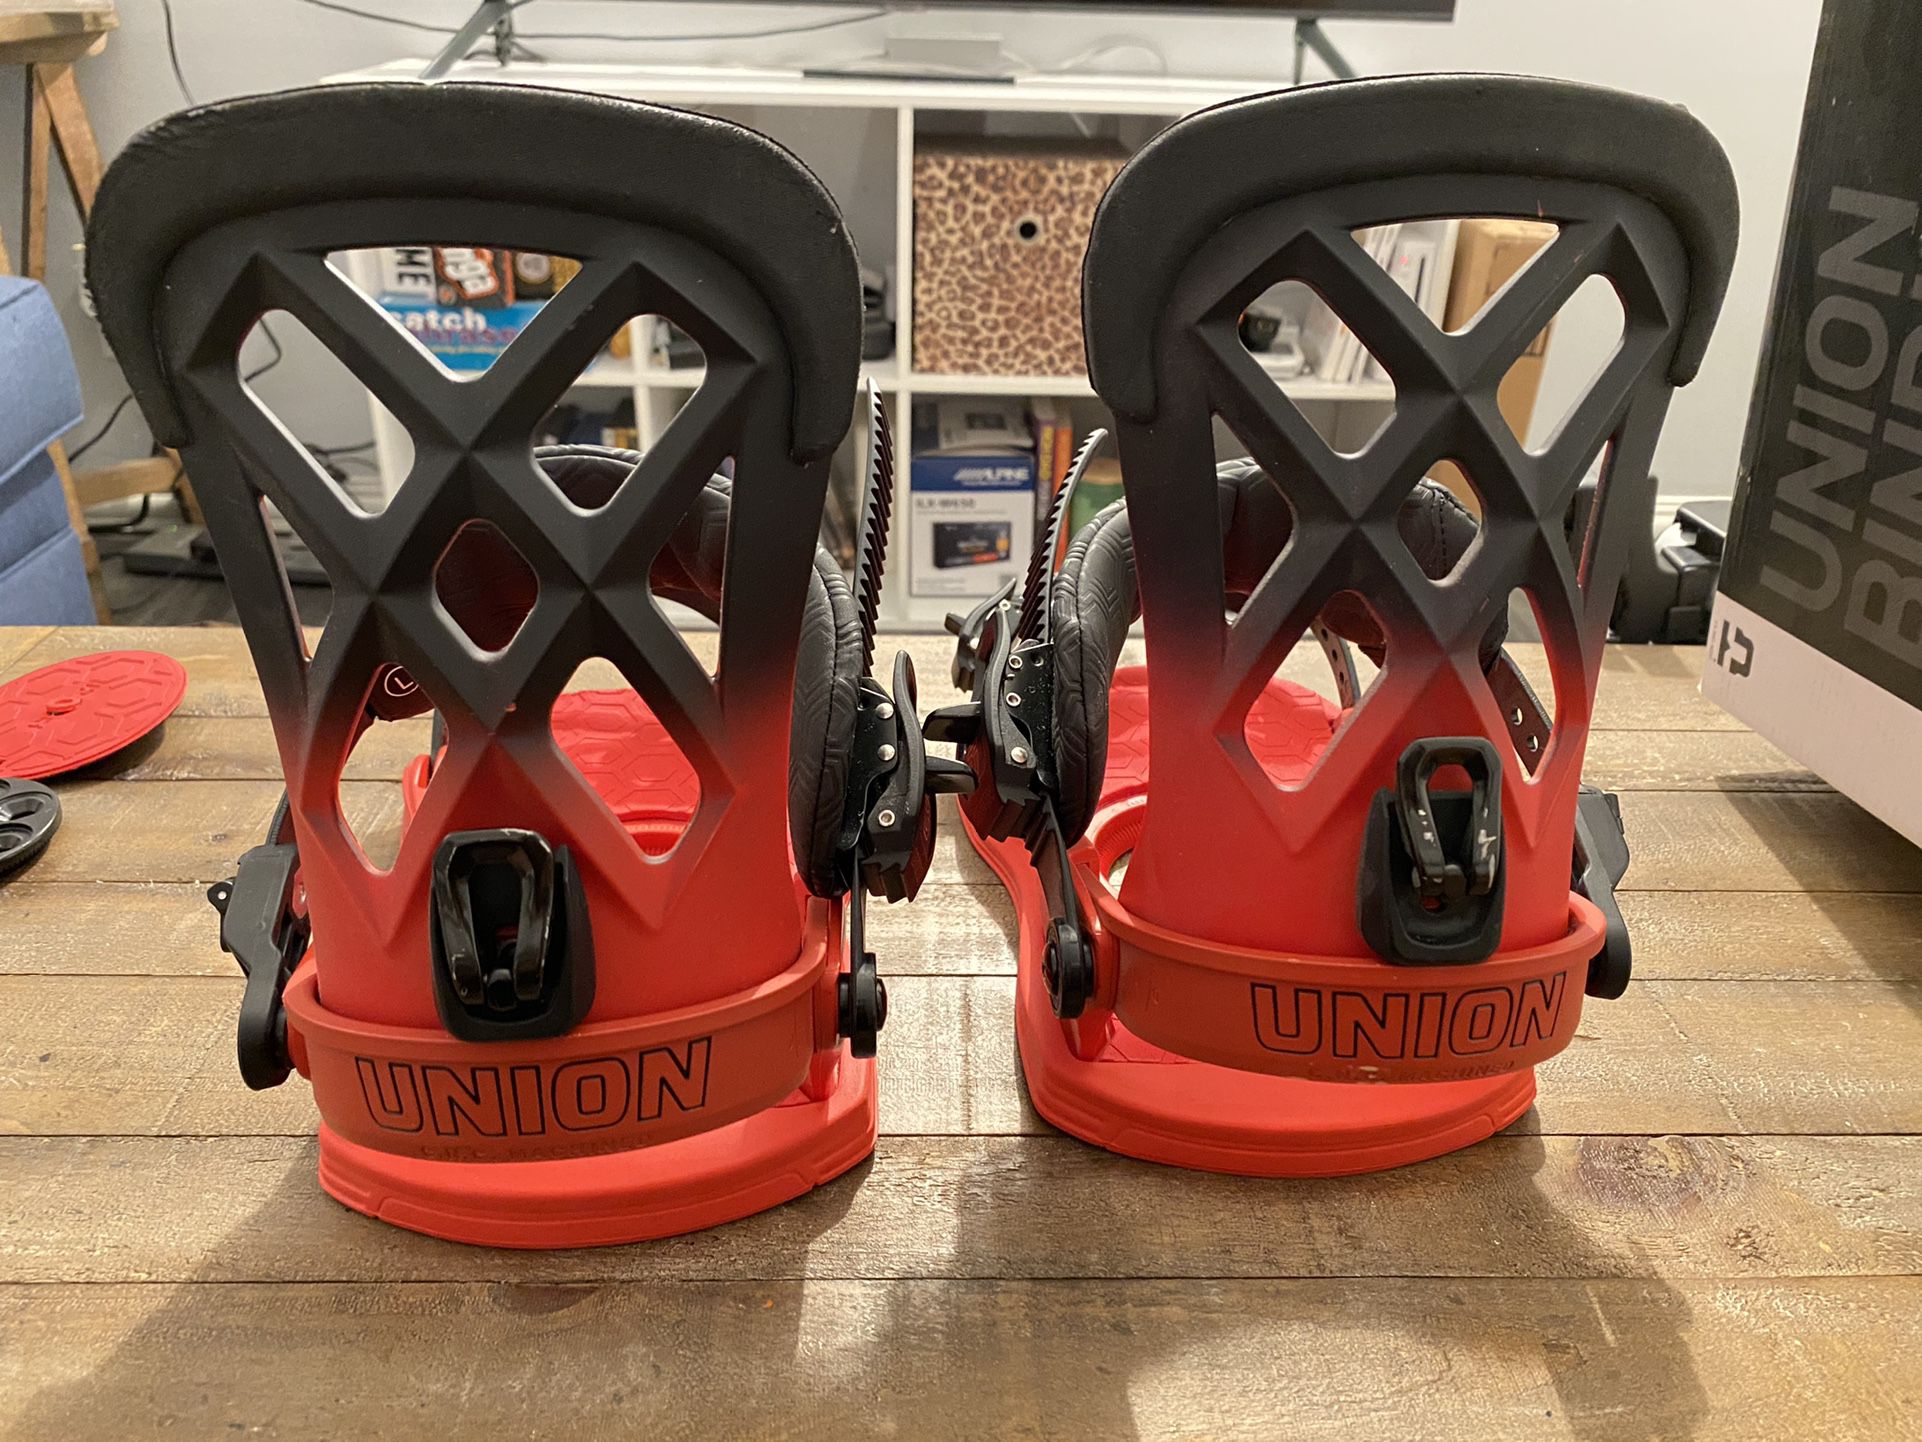 2017/Union Contact Pro Snowboard Bindings in Volt Red